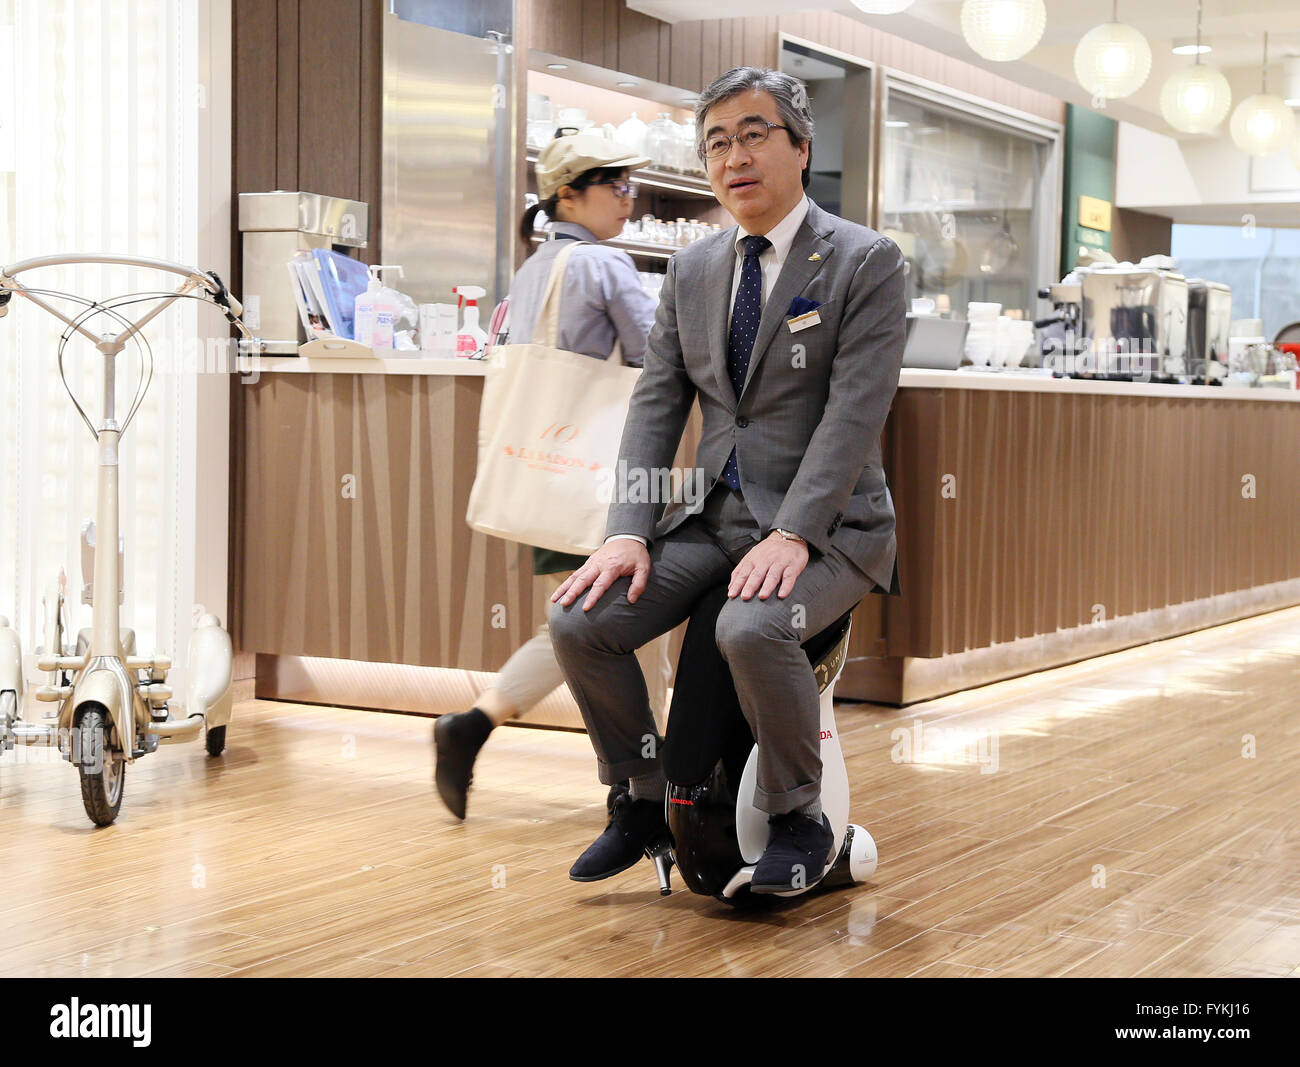 Tokyo, Japan. 27th Apr, 2016. Yoji Naka, the manager of Japan's Mitsukoshi department main store demonstrates a personal mobility device 'Uni-Cub beta', developed by Japanese auto giant Honda Motor at the Hajimarino Cafe of the main store of Mitsukoshi in Tokyo on Wednesday, April 27, 2016. The Mitsukoshi and Honda started customer services using the saddle style mobility, such as test drive inside the department store. Credit:  Yoshio Tsunoda/AFLO/Alamy Live News Stock Photo